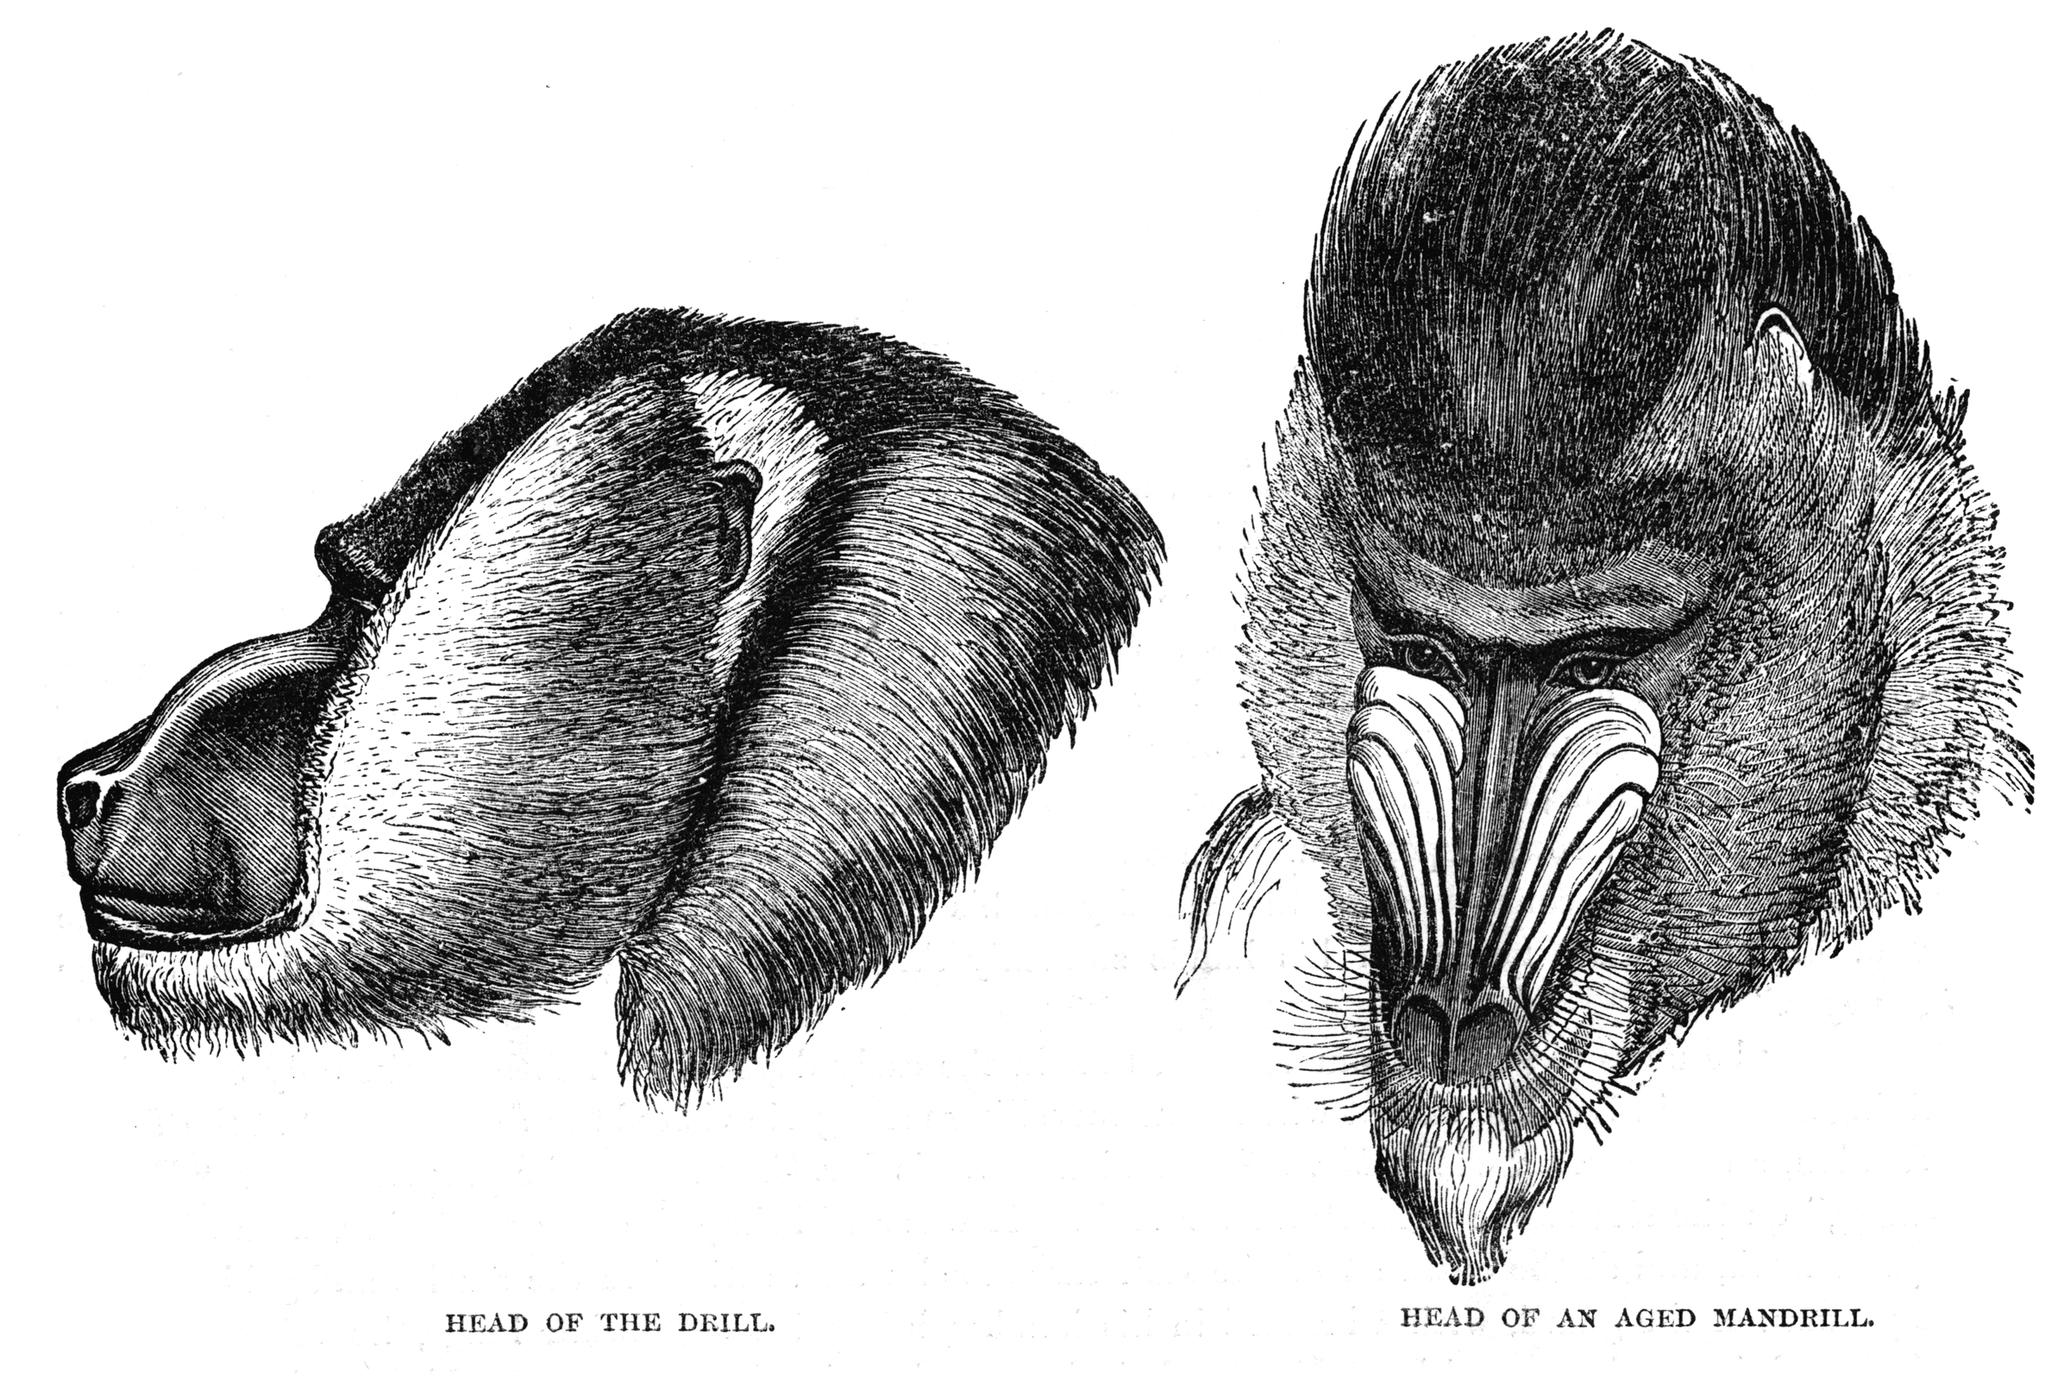 Head of the Drill and Head of an Aged Mandrill